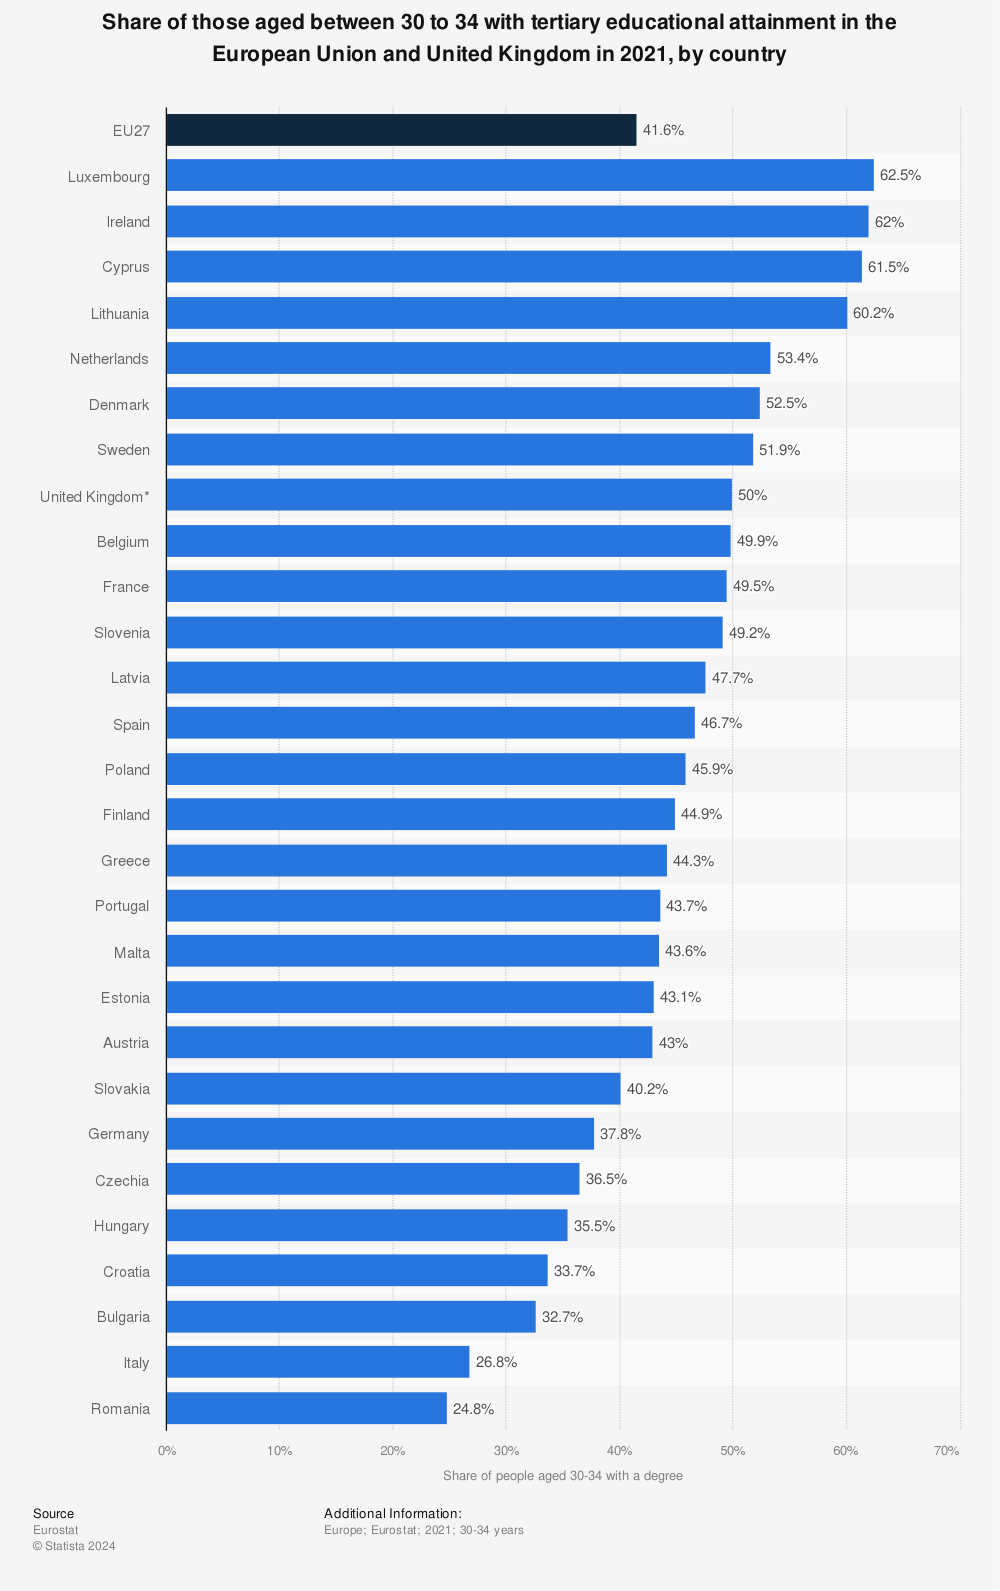 Statistic: Share of those aged between 30 to 34 with tertiary educational attainment in selected European countries in 2020 | Statista